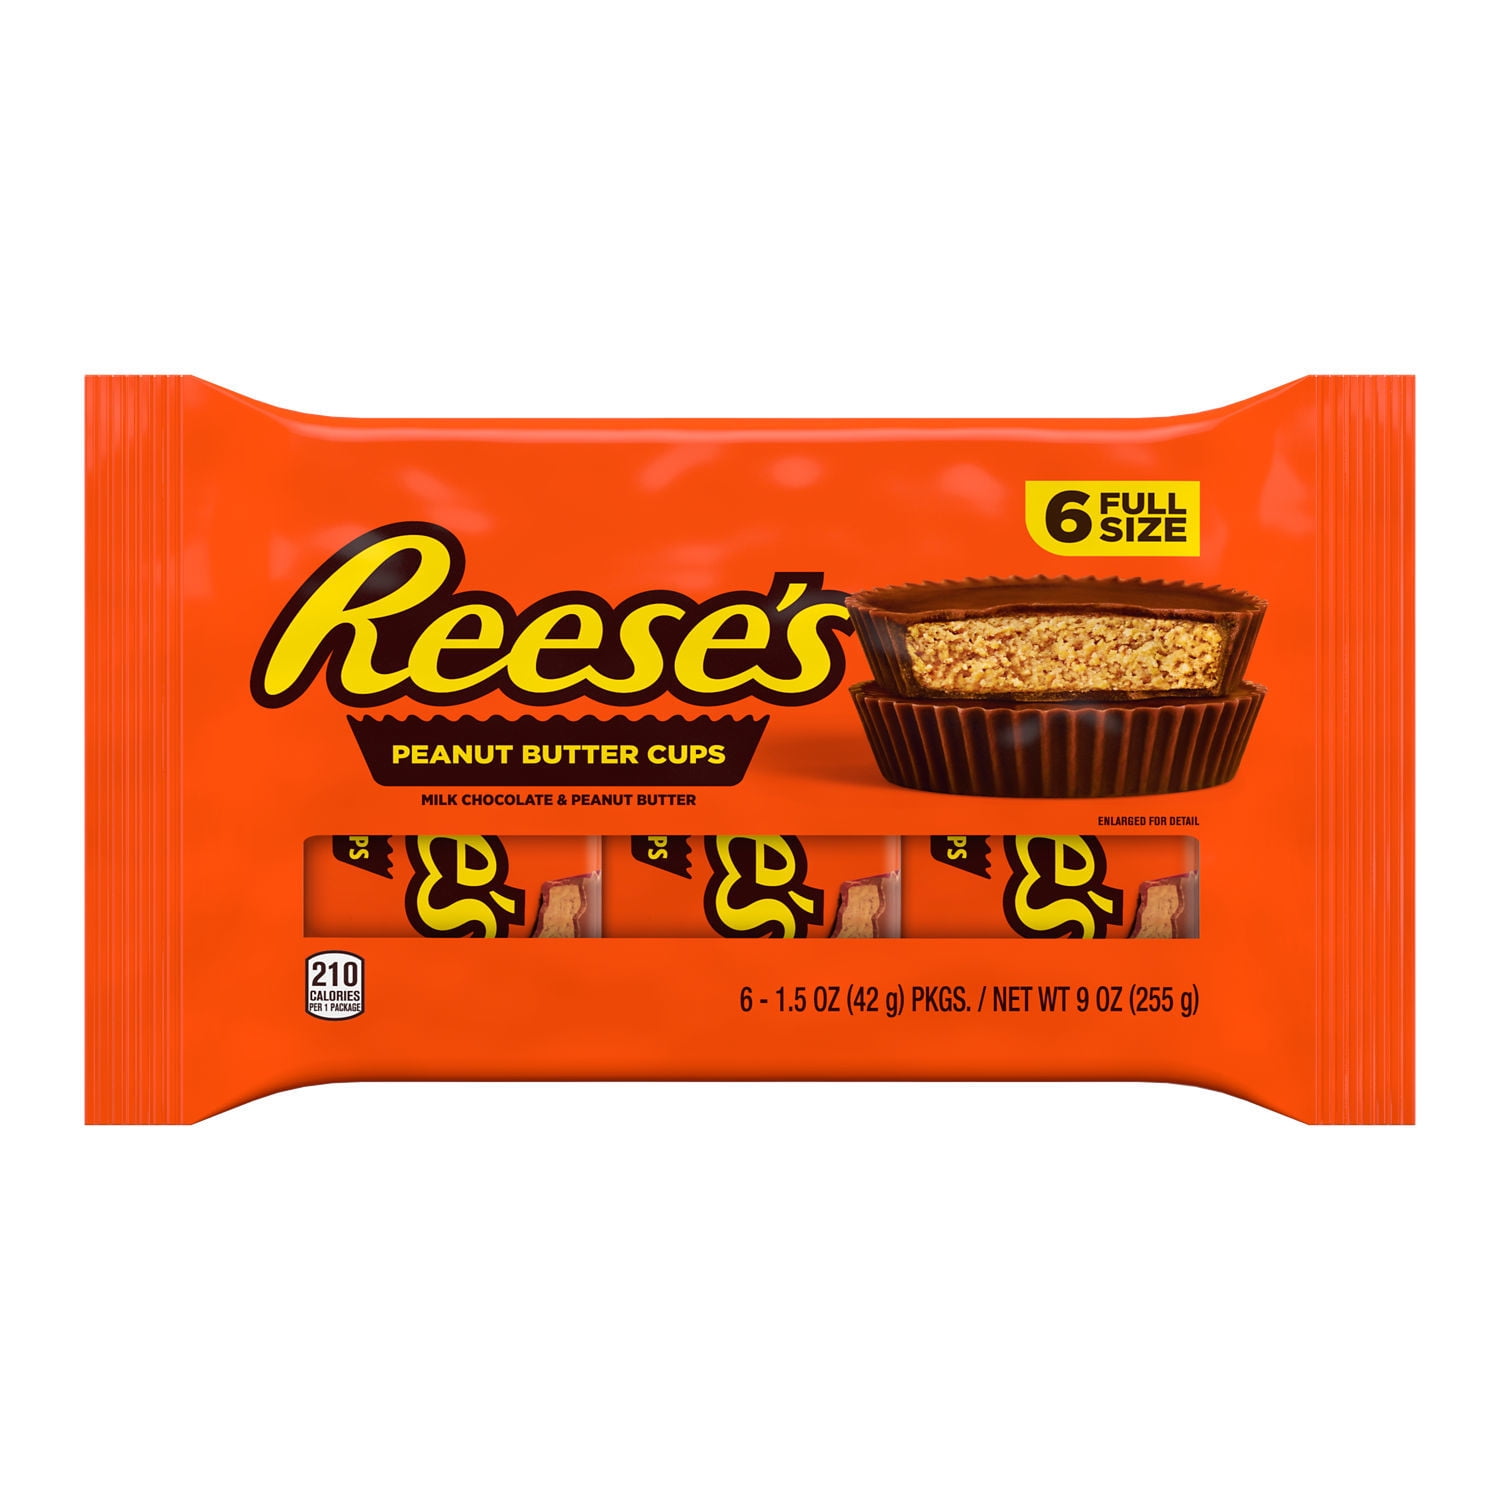 REESE'S Milk Chocolate Full Size, Easter Peanut Butter Cups Candy Packs, 1.5 oz (6 Count)